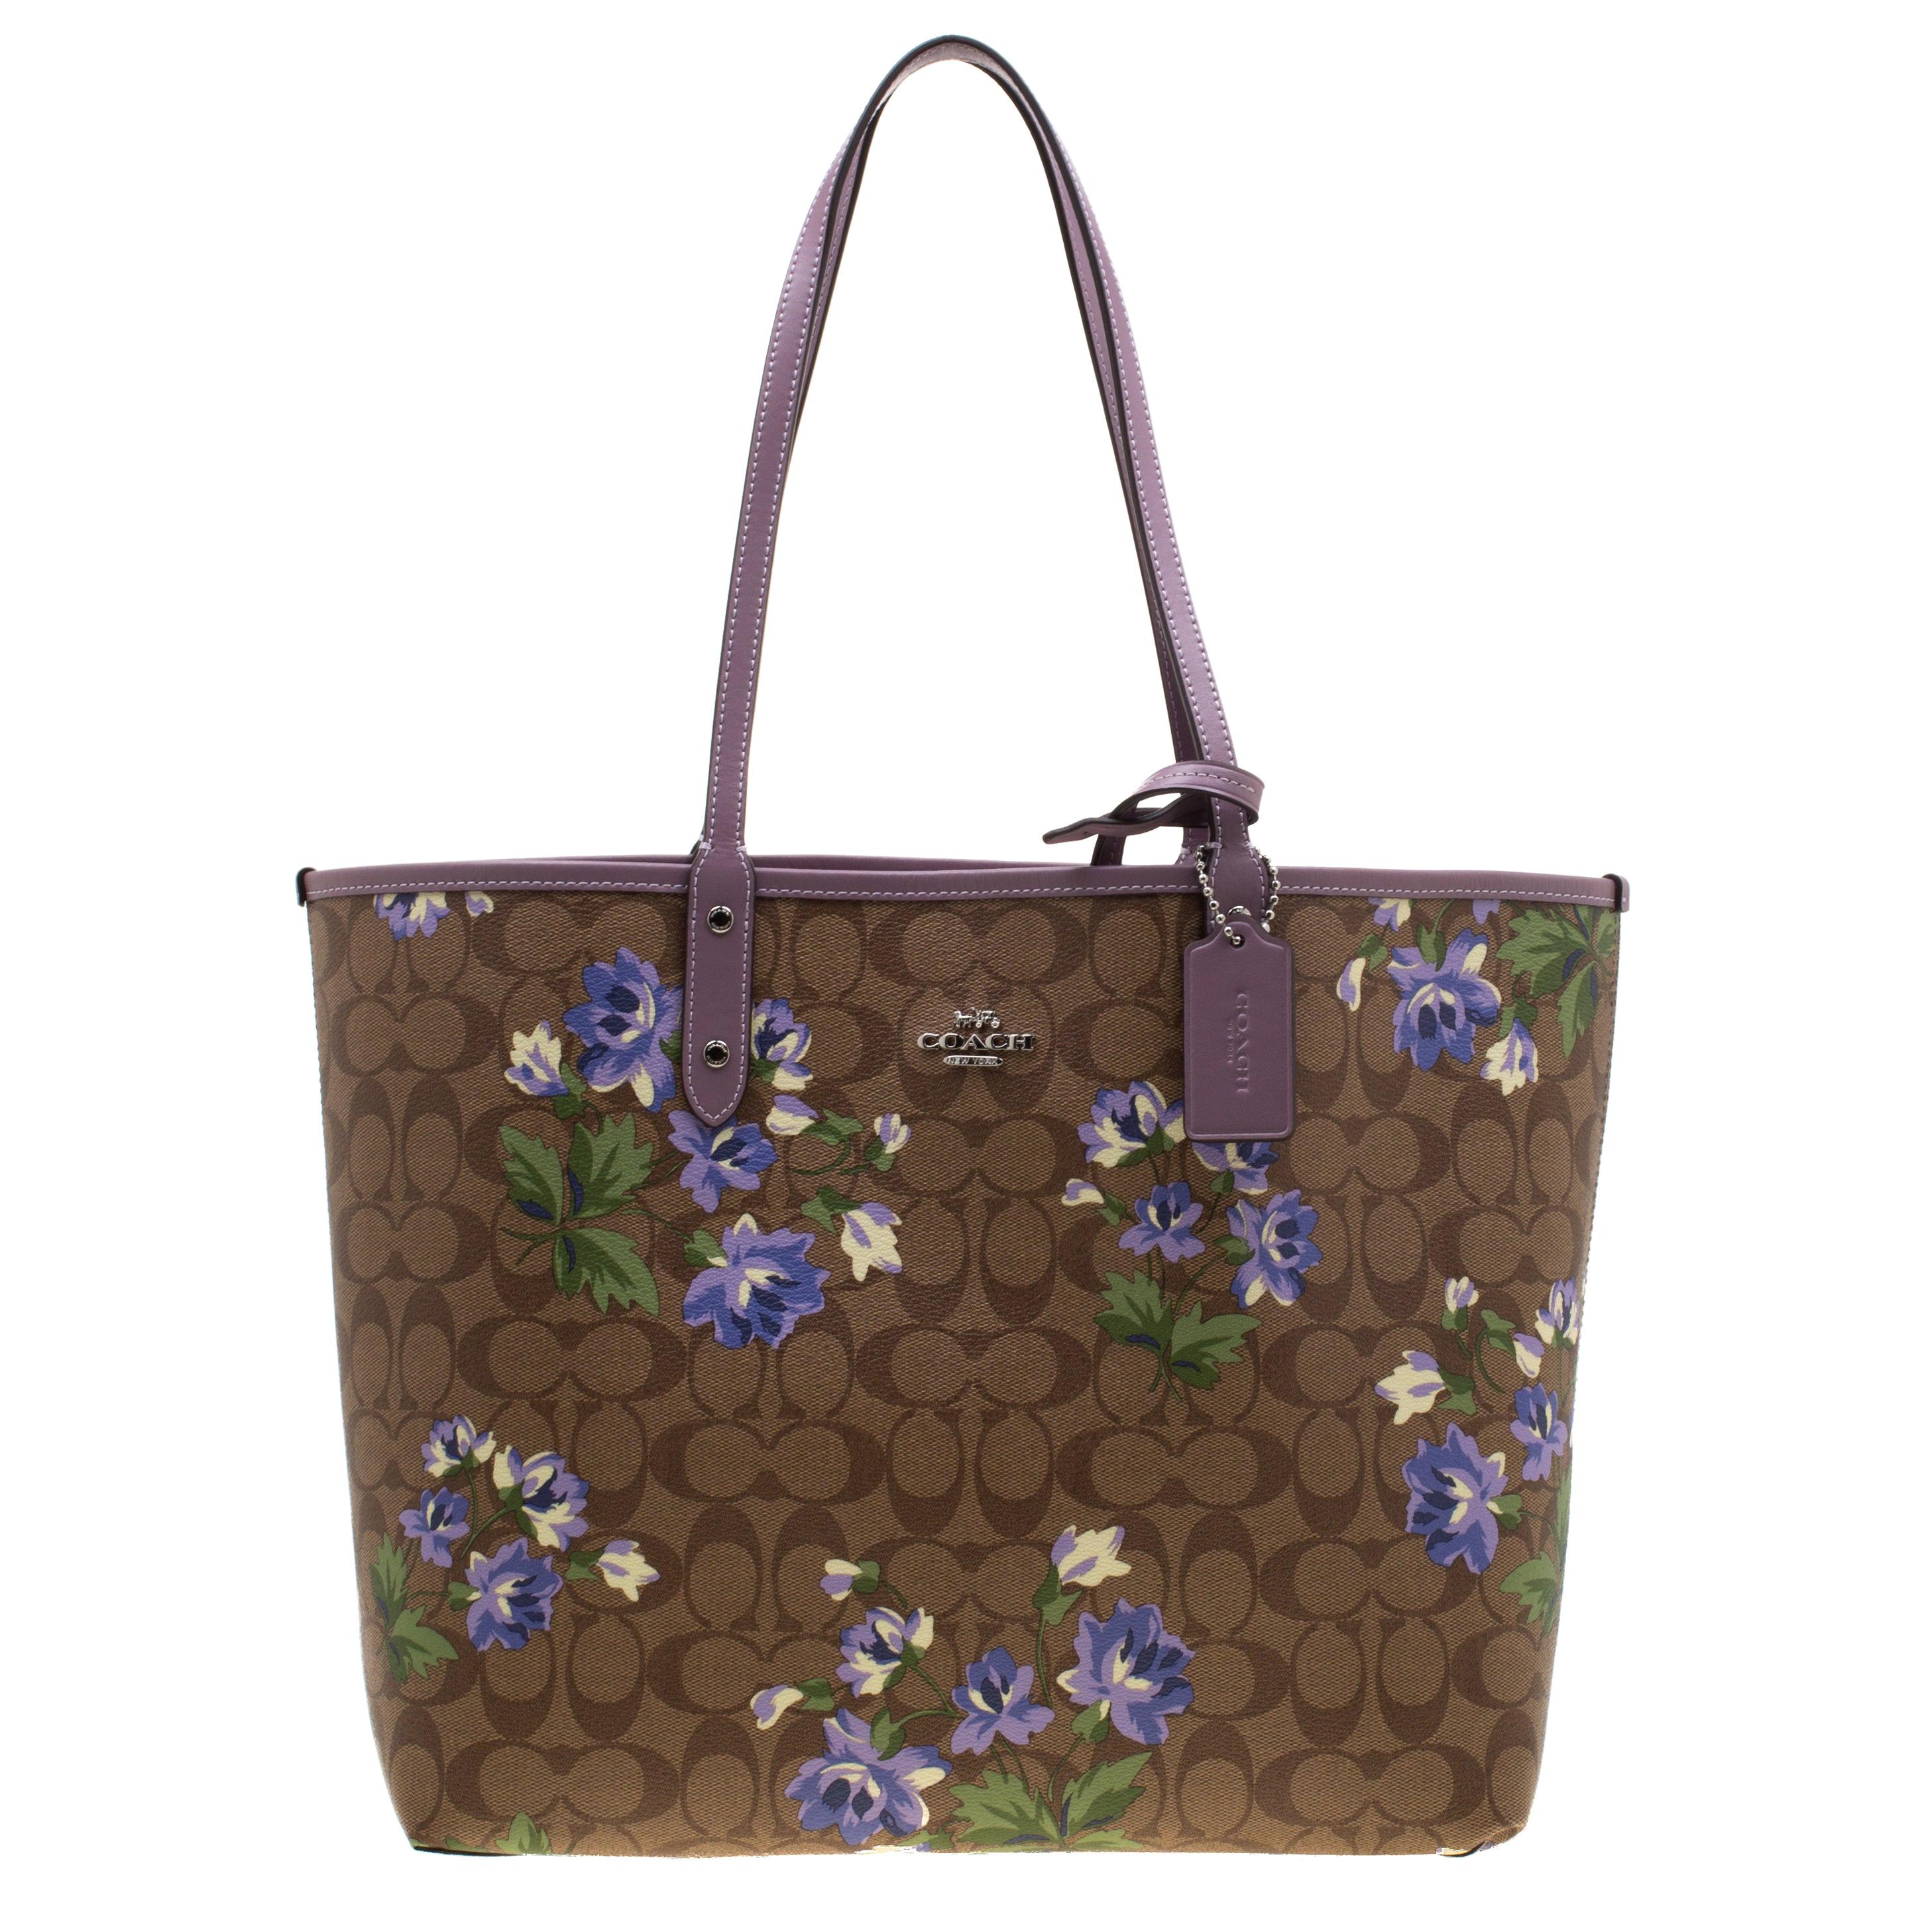 COACH F57668 REVERSIBLE CITY TOTE FLOWER PURPLE/RED/PINK/FLORAL BROWN MULTI